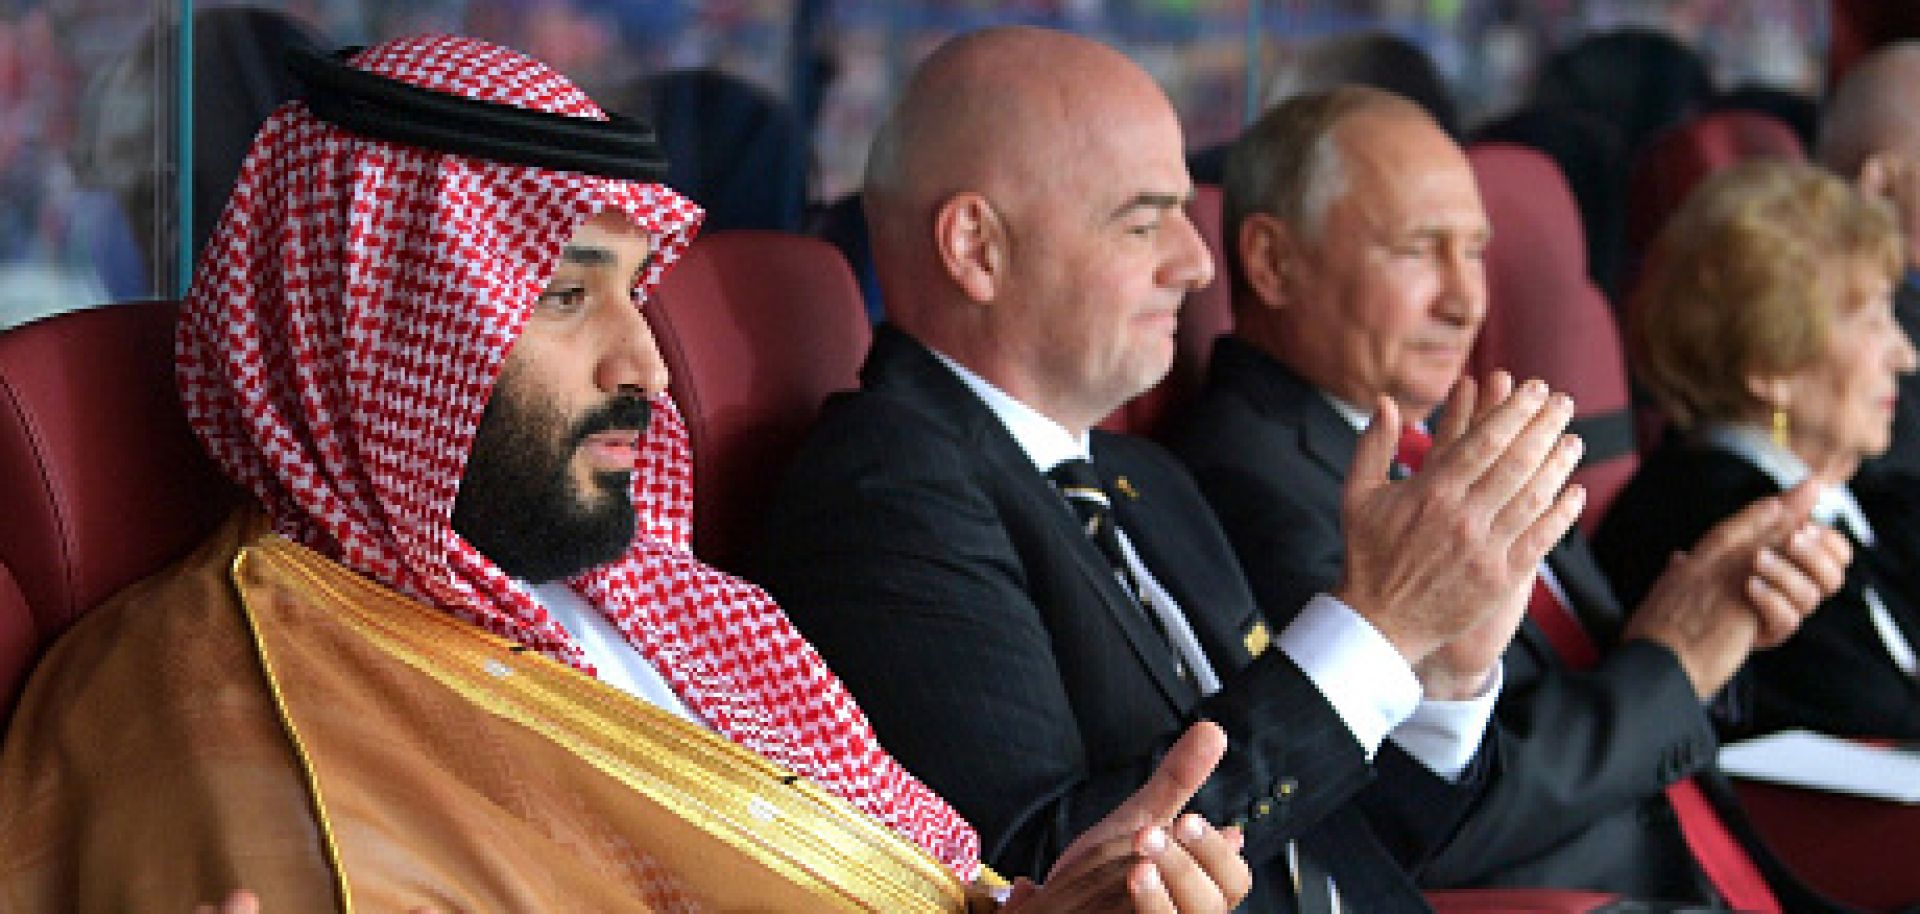 Saudi Crown Prince Mohammed bin Salman (L) and Russian President Vladimir Putin (R) watch their national teams square off in the first match of the 2018 FIFA World Cup in Moscow on June 14.